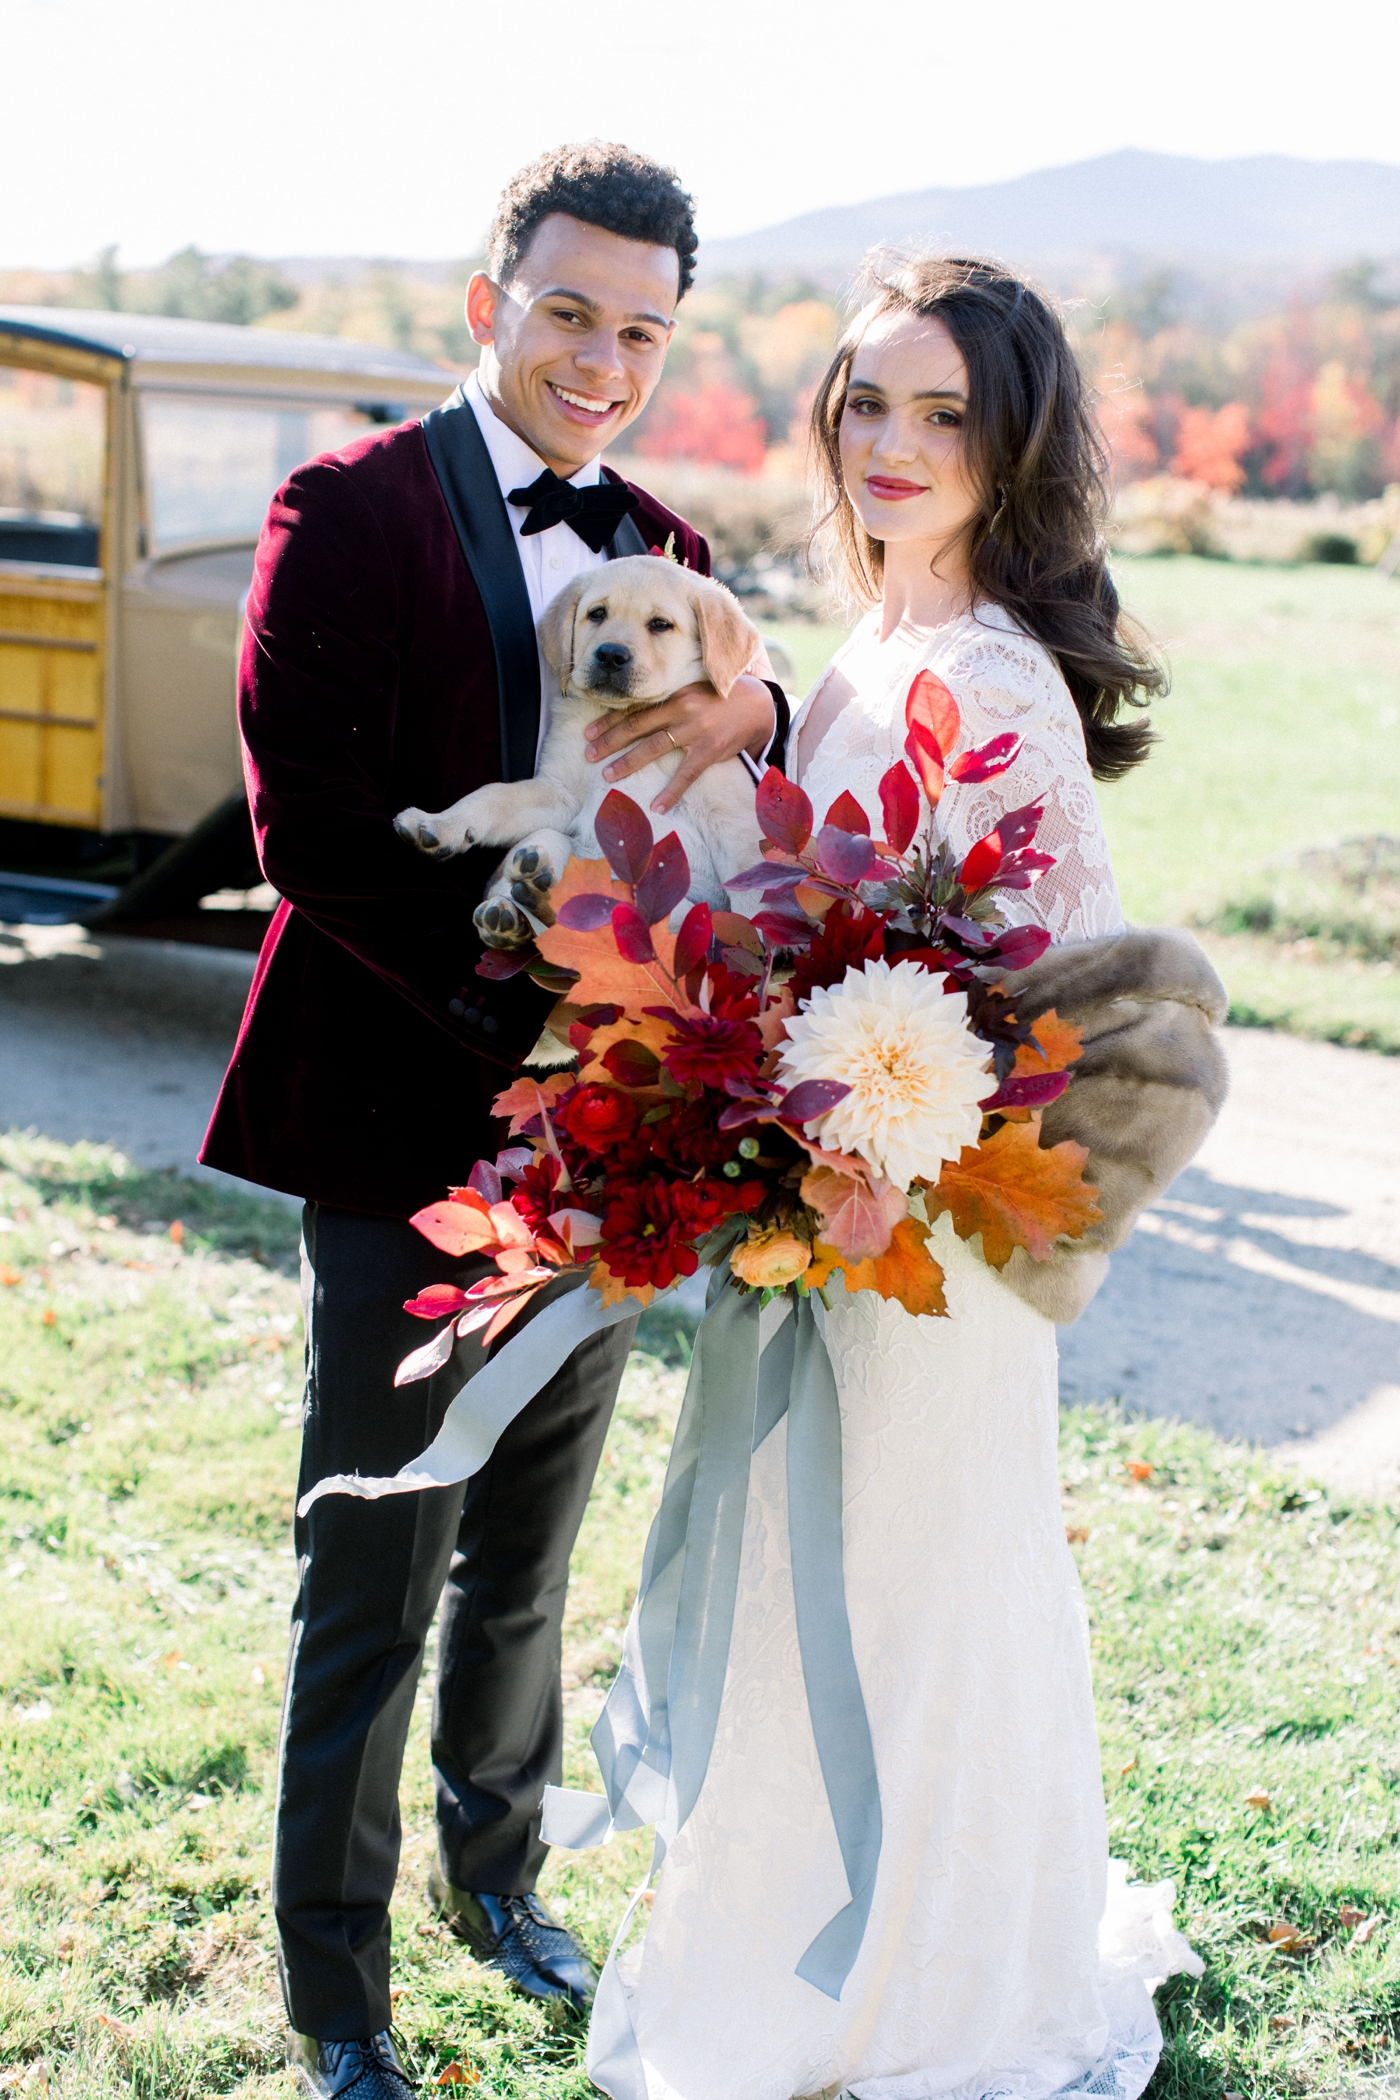 Tartan and stone fruit wedding decor play a central role in this late fall elopement at Mount Monadnock.